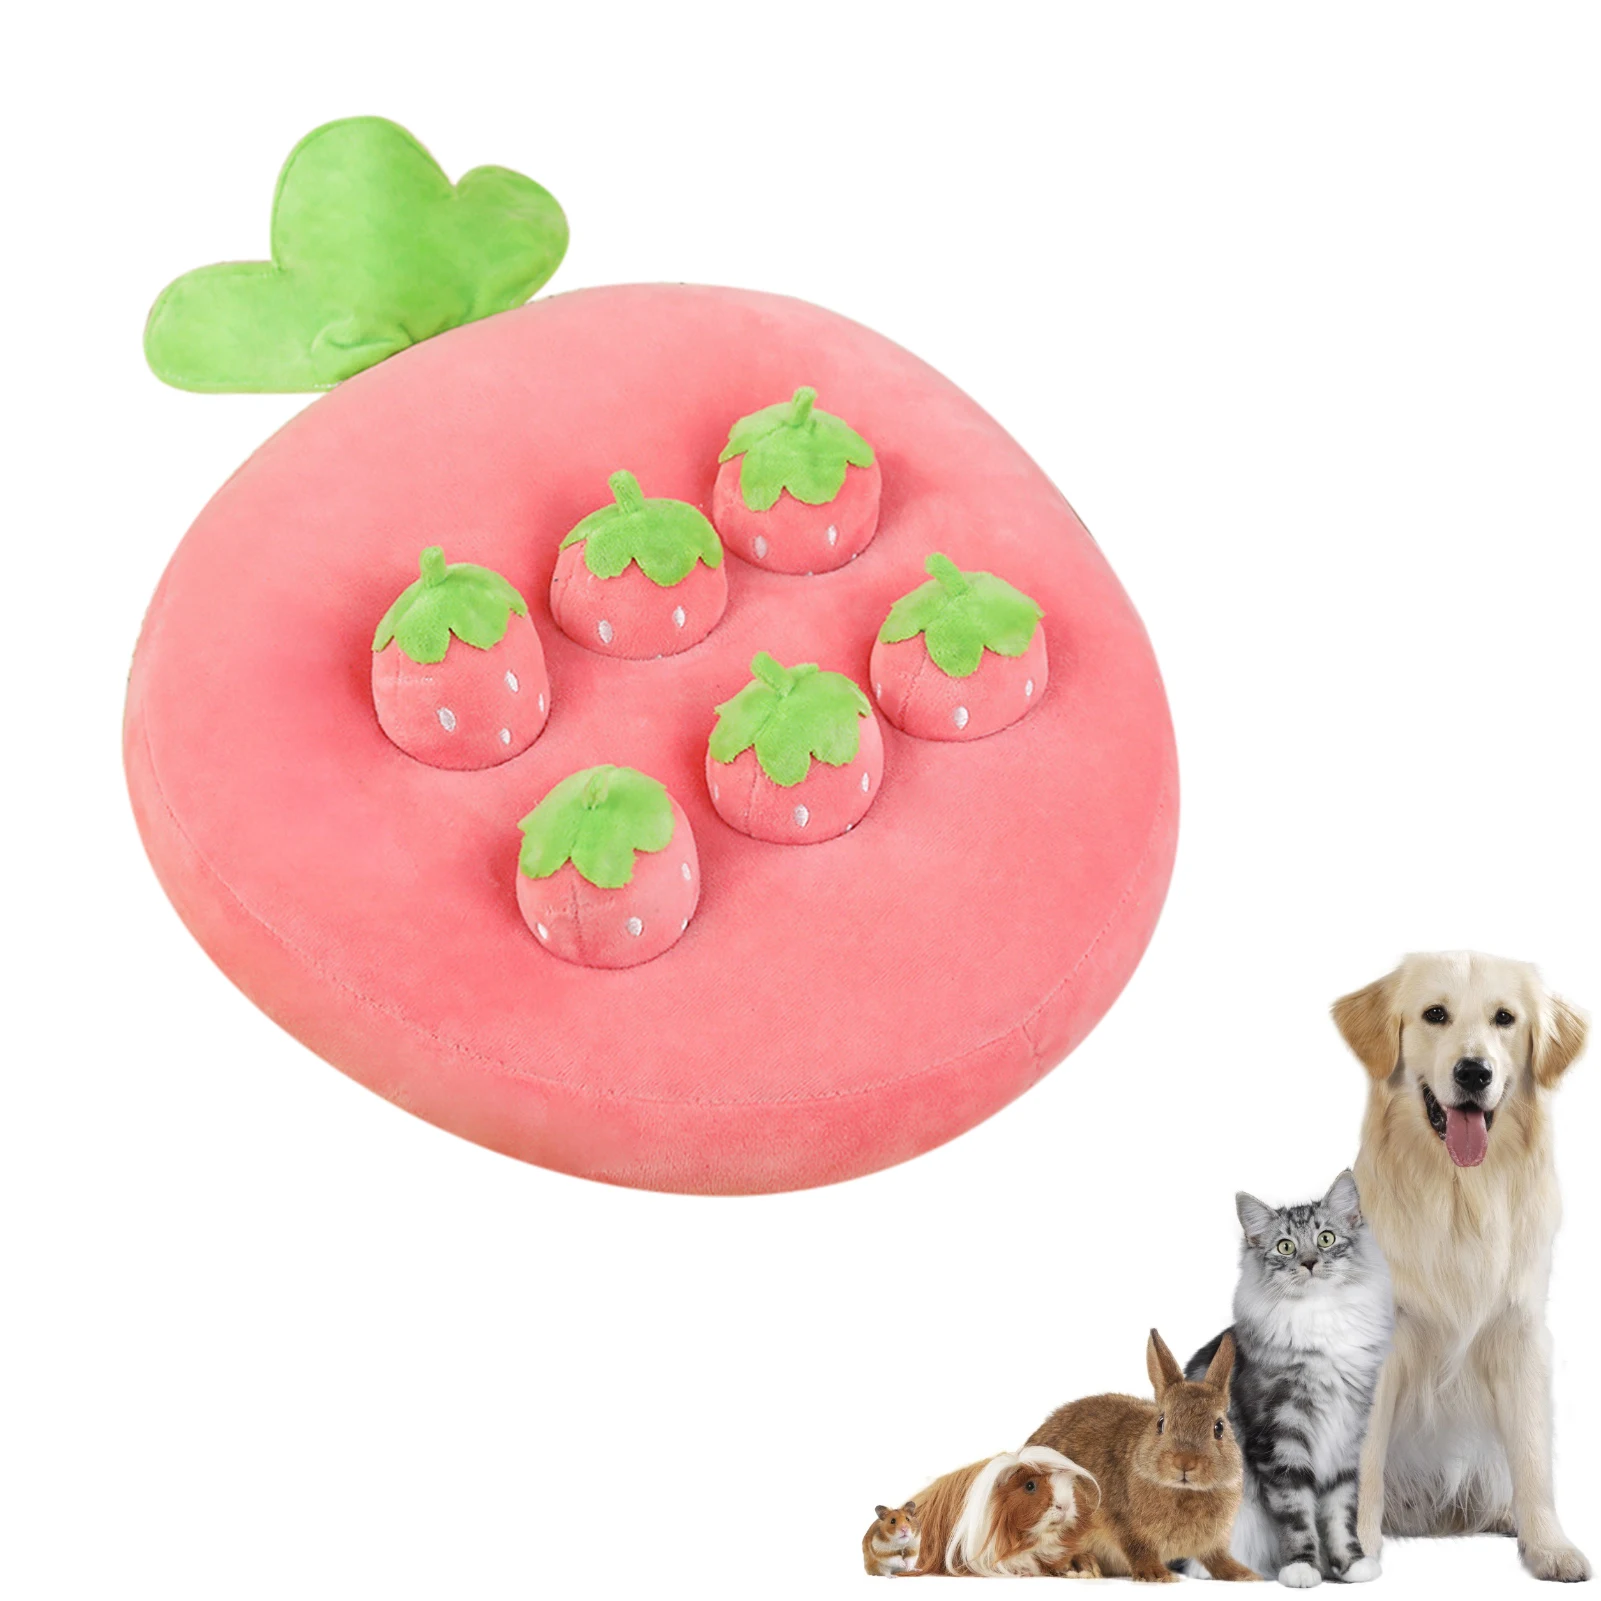 

Interactive Dog Toys For Boredom Plush Dog Toy Molar Chew Snuffle Mat With Carrot Pineapple Strawberry For Puppy Pet Supplies